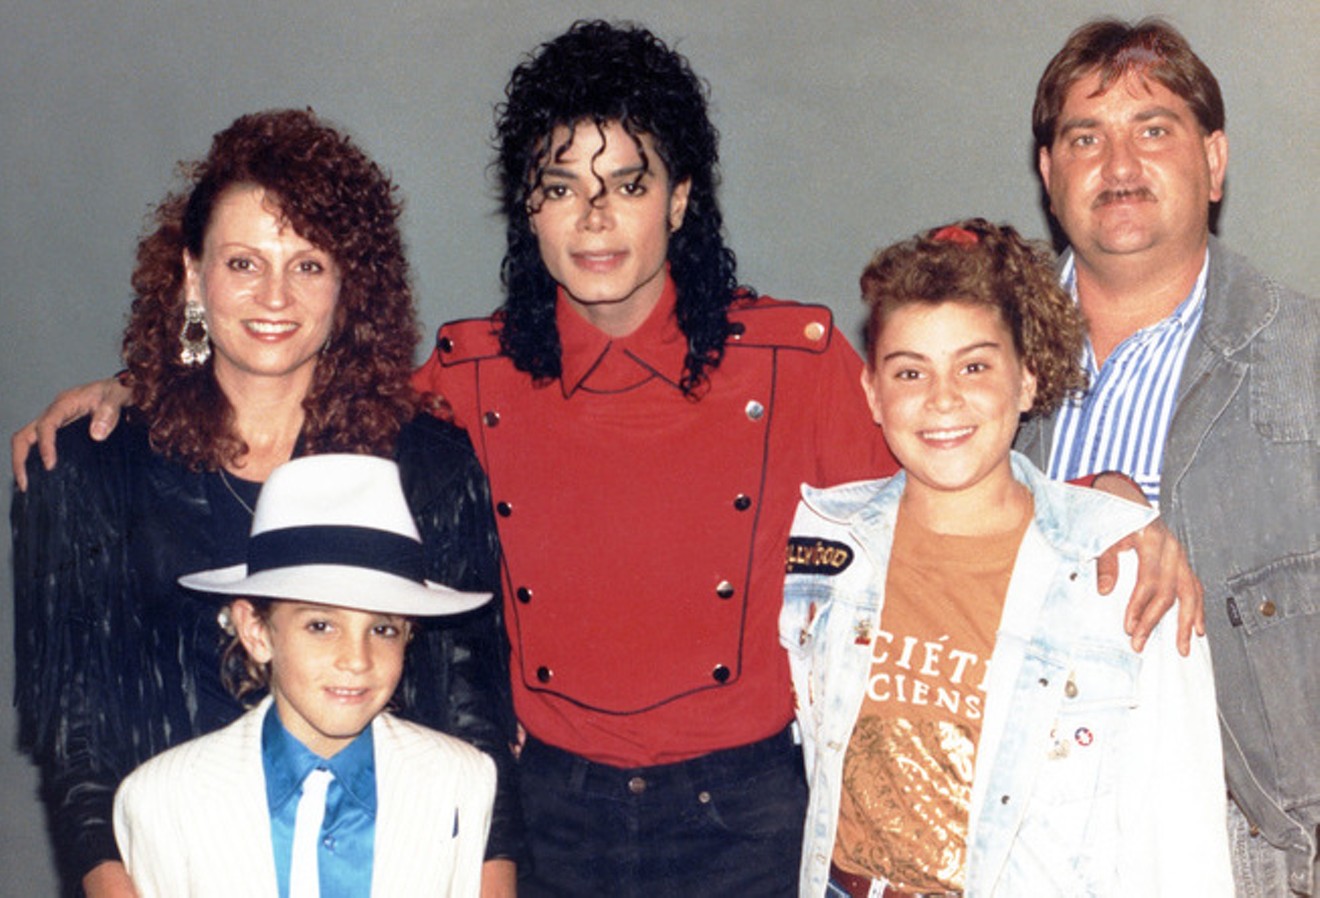 Michael Jackson (center) with the family of Wade Robson: Joy Robson, Wade, Chantal Robson, and Dennis Robson in 1990.